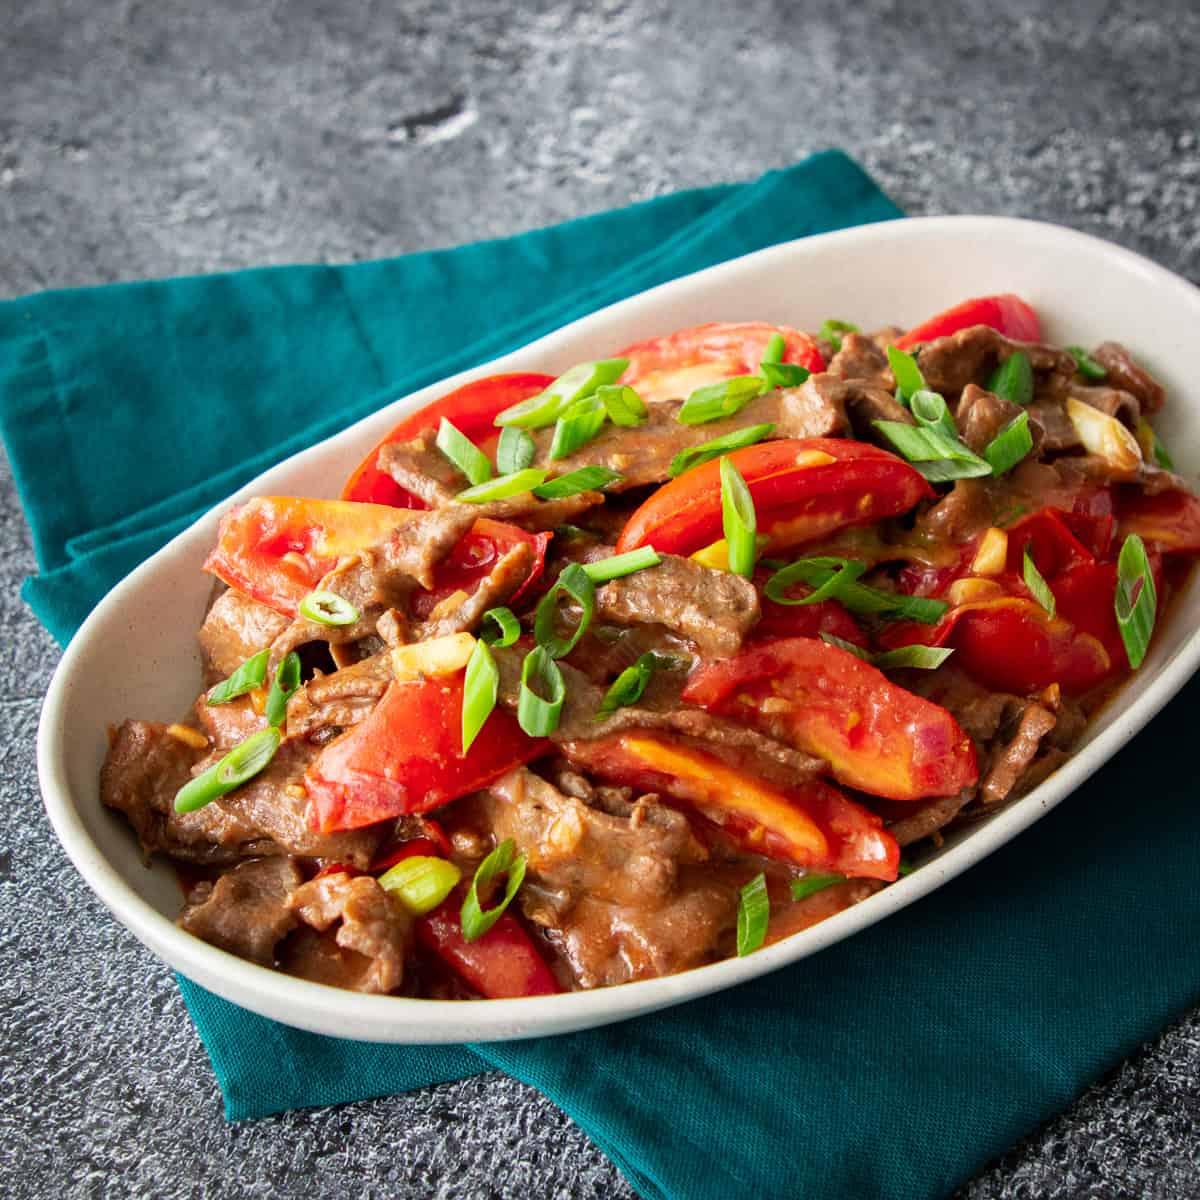 Stir-fried steak and tomatoes over noodles